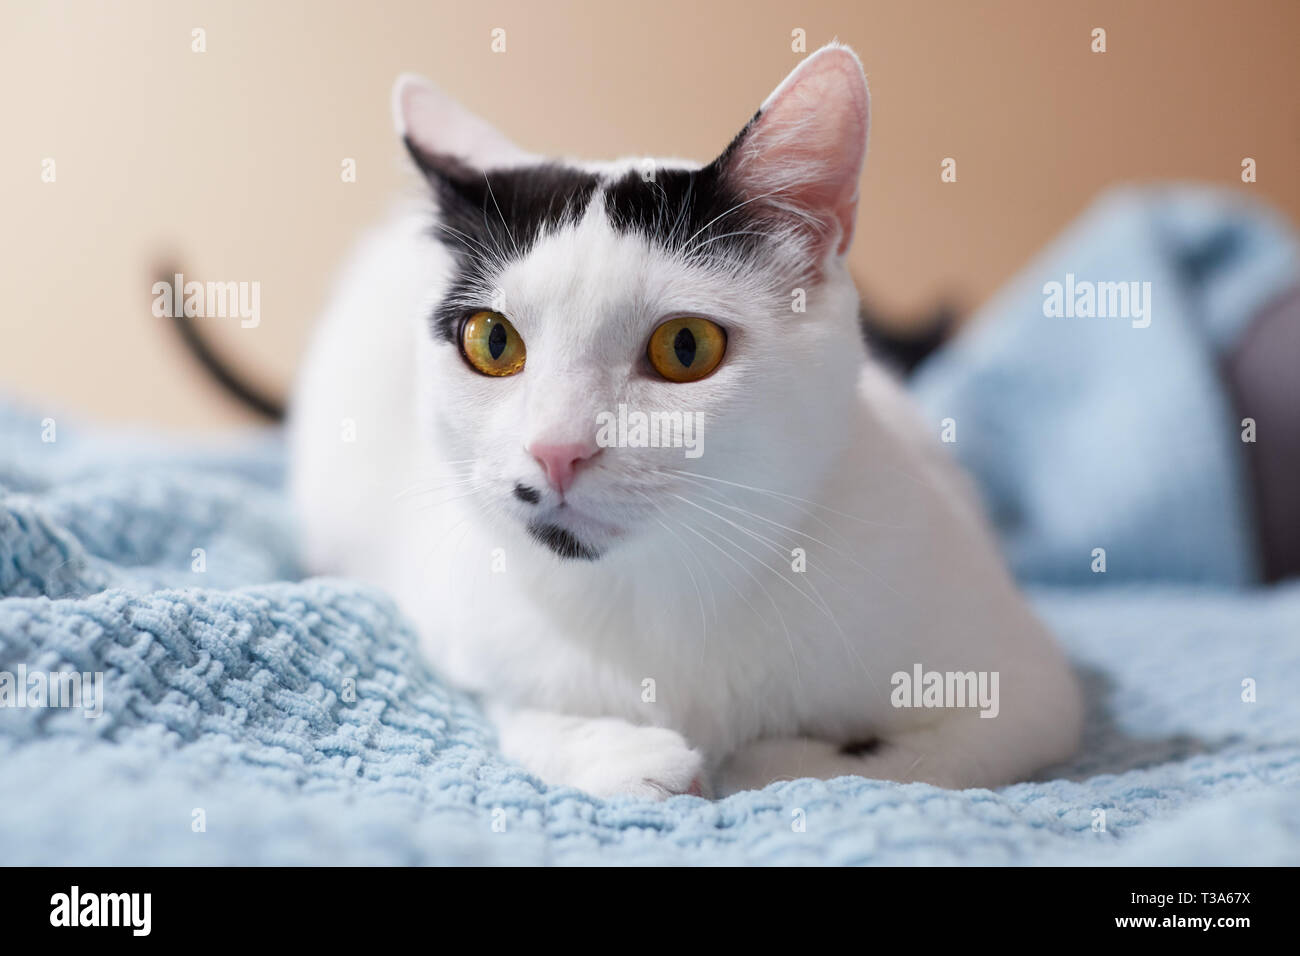 A playful white and black cat with a beauty mark and yellow eyes is sitting on a blue blanket Stock Photo